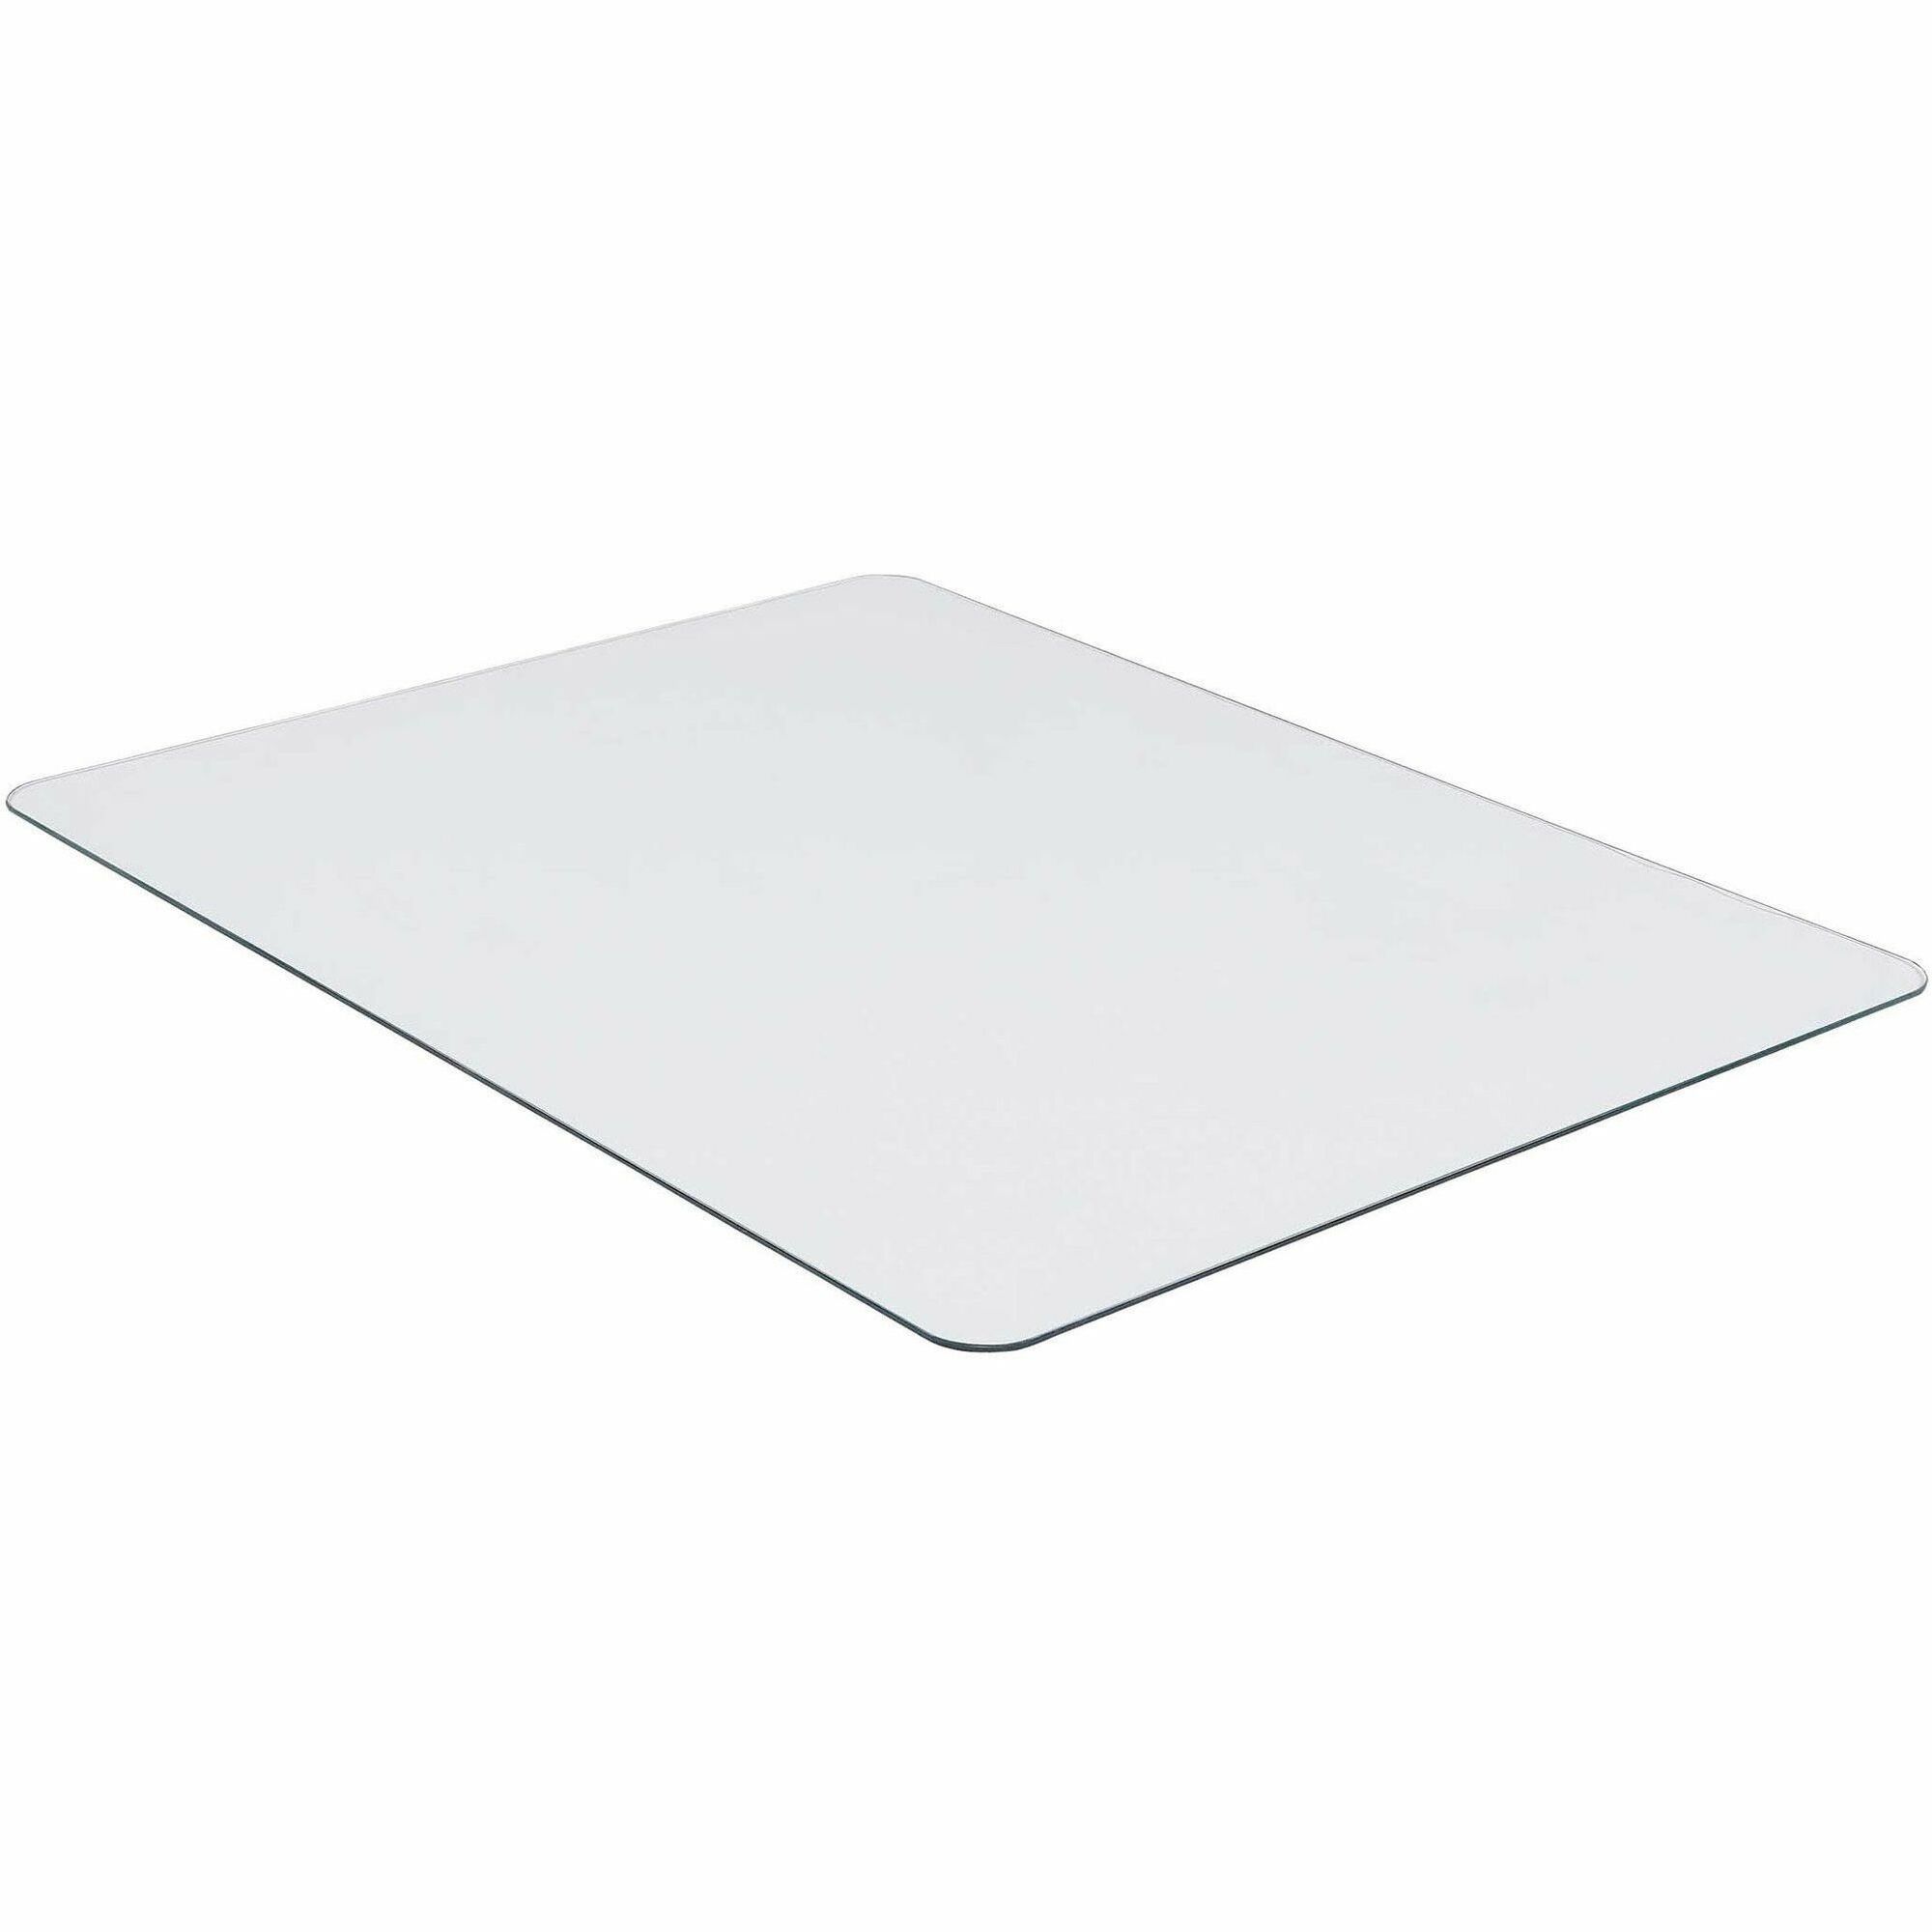 Lorell Tempered Glass Chairmat - Floor, Pile Carpet, Hardwood Floor, Marble - 36 Length X 46 Width X 0.25 Thickness - Rectangle - Tempered Glass - Clear